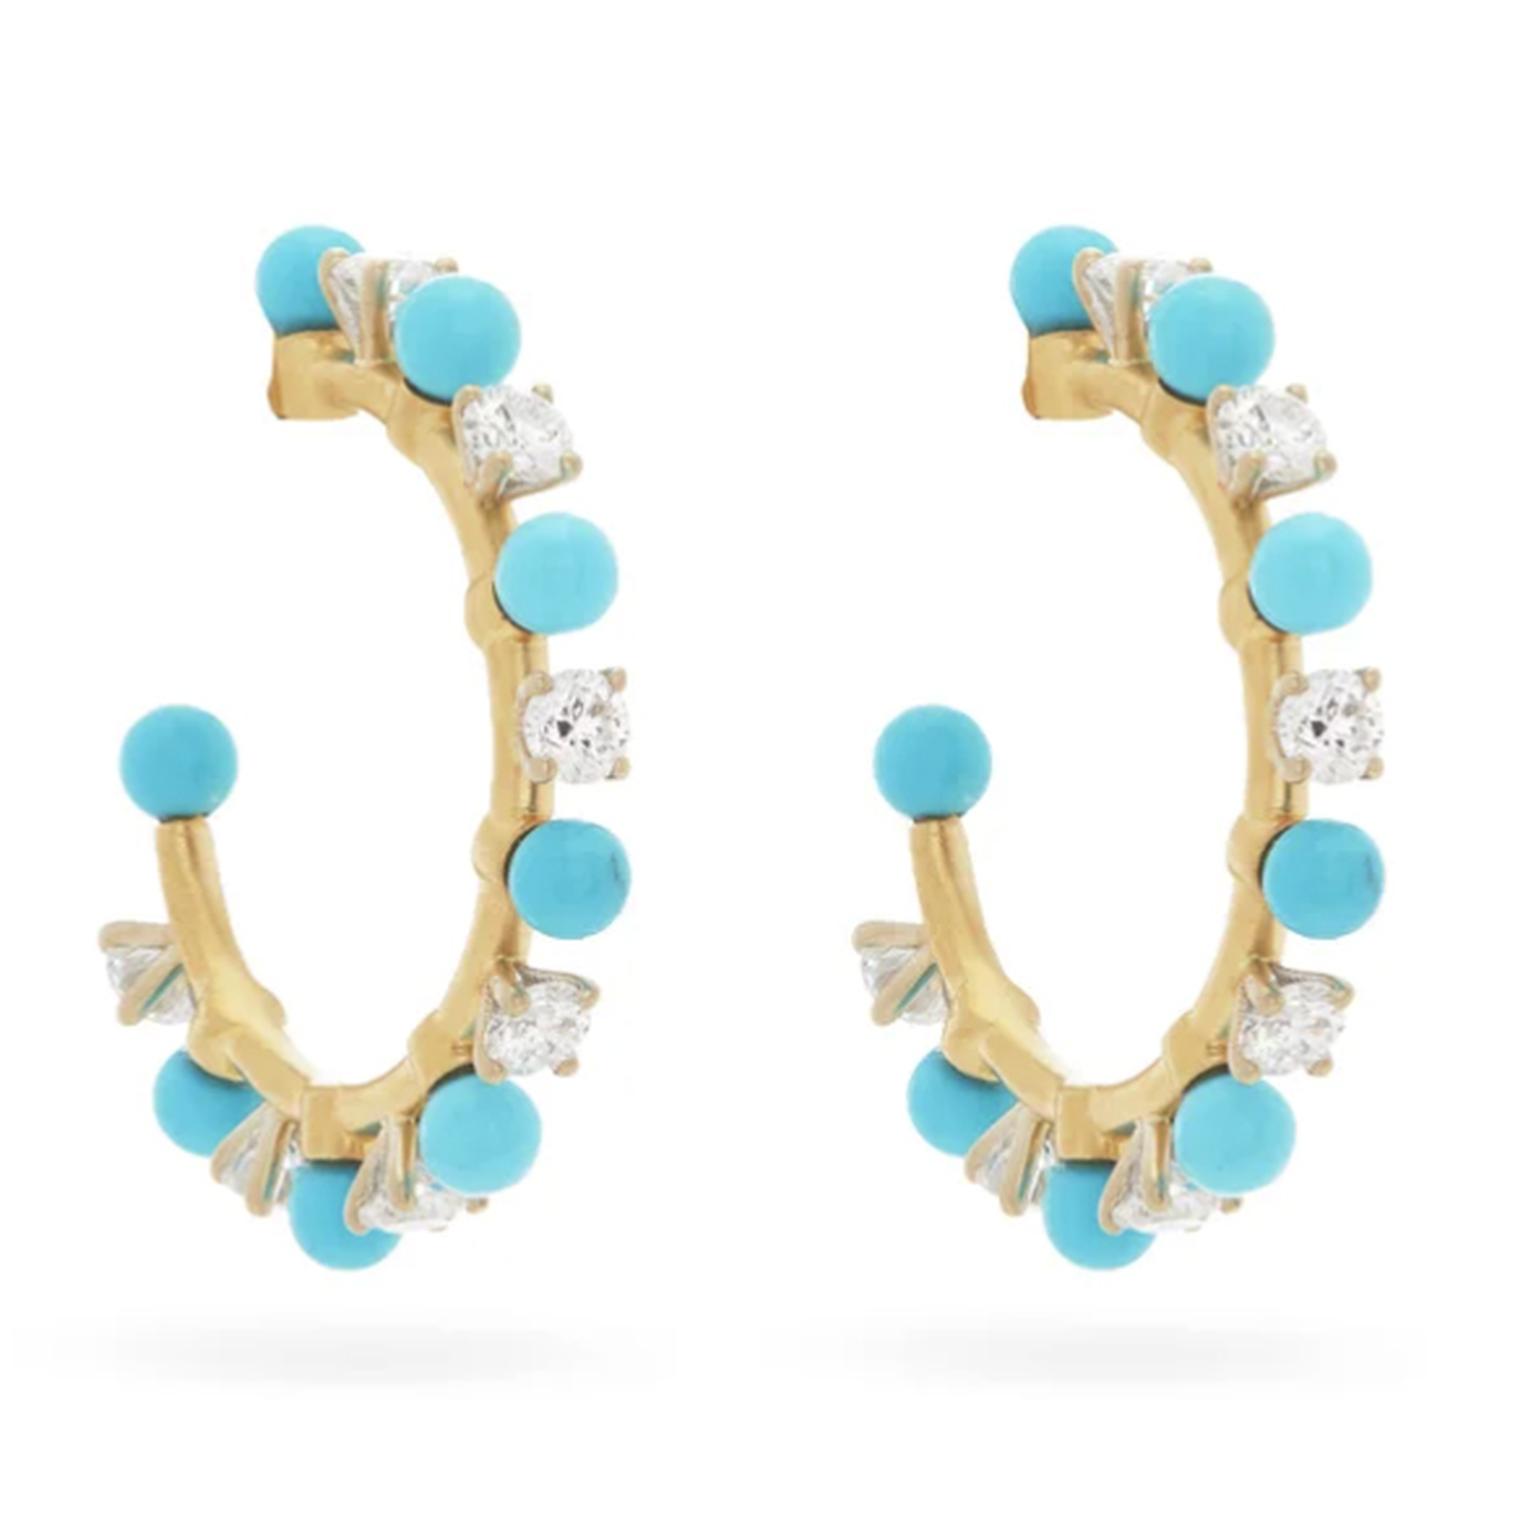 Turquoise: the ornamental blue stone that is becoming rarer with each passing year